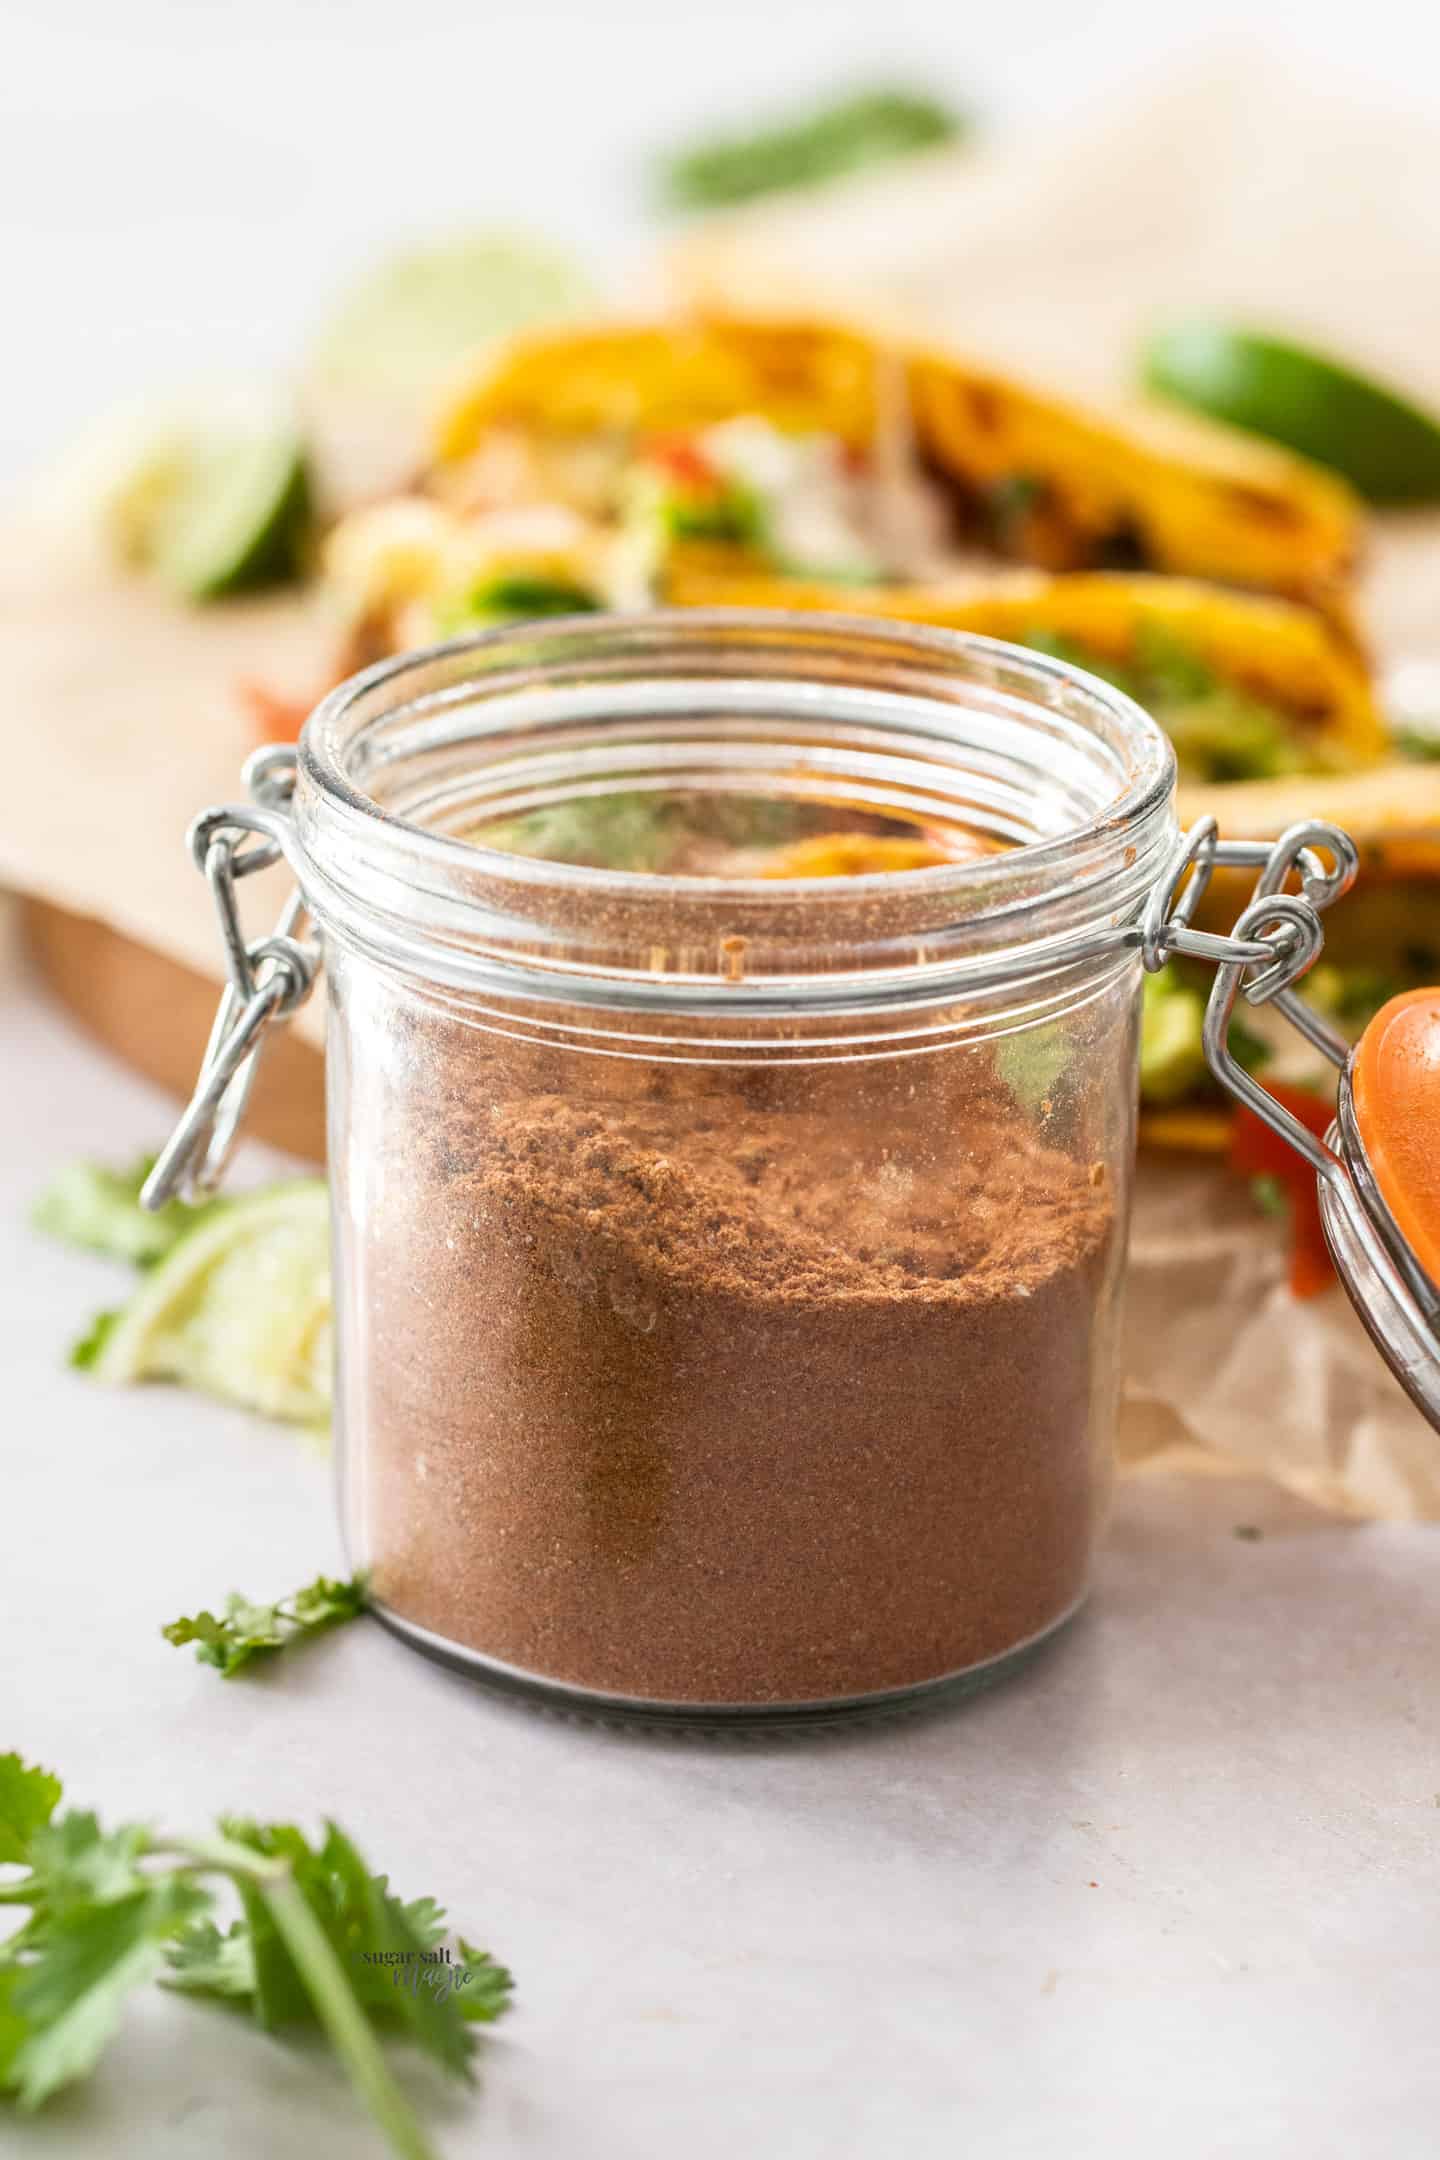 A small jar filled with taco seasoning.